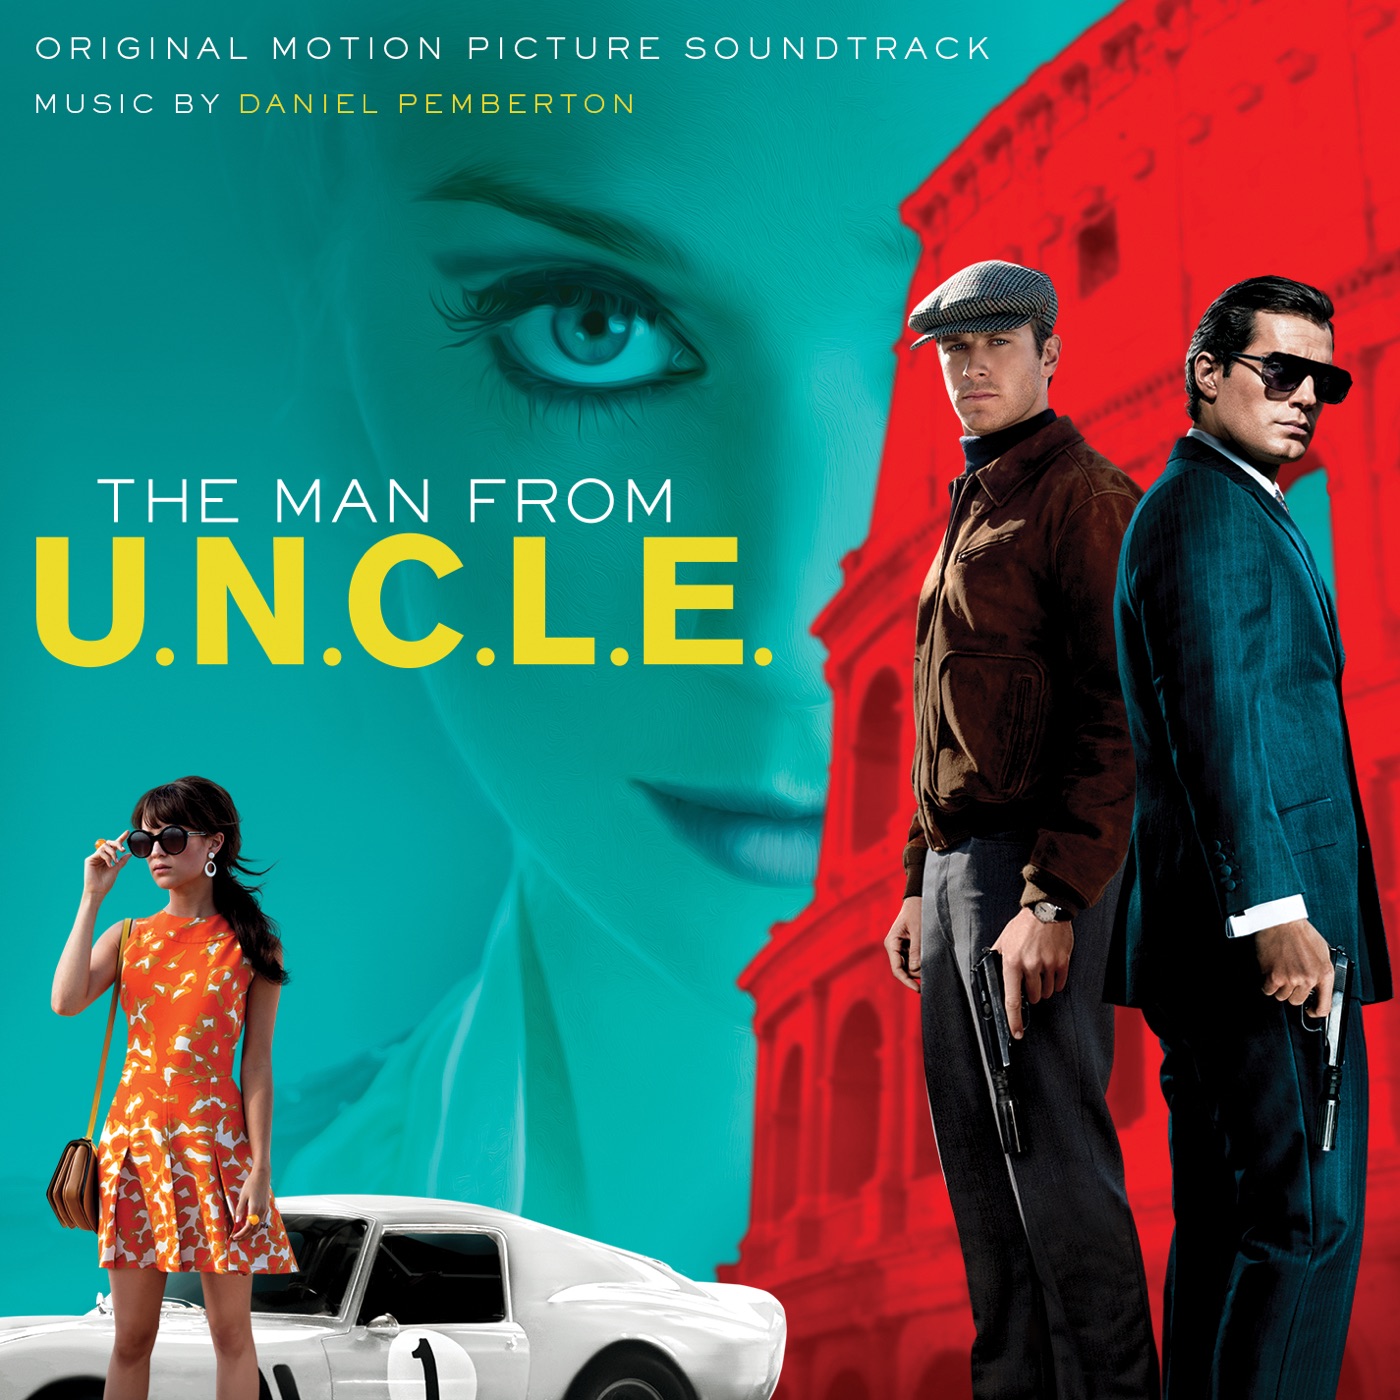 The Man from U.N.C.L.E. (Original Motion Picture Soundtrack) by Various Artists